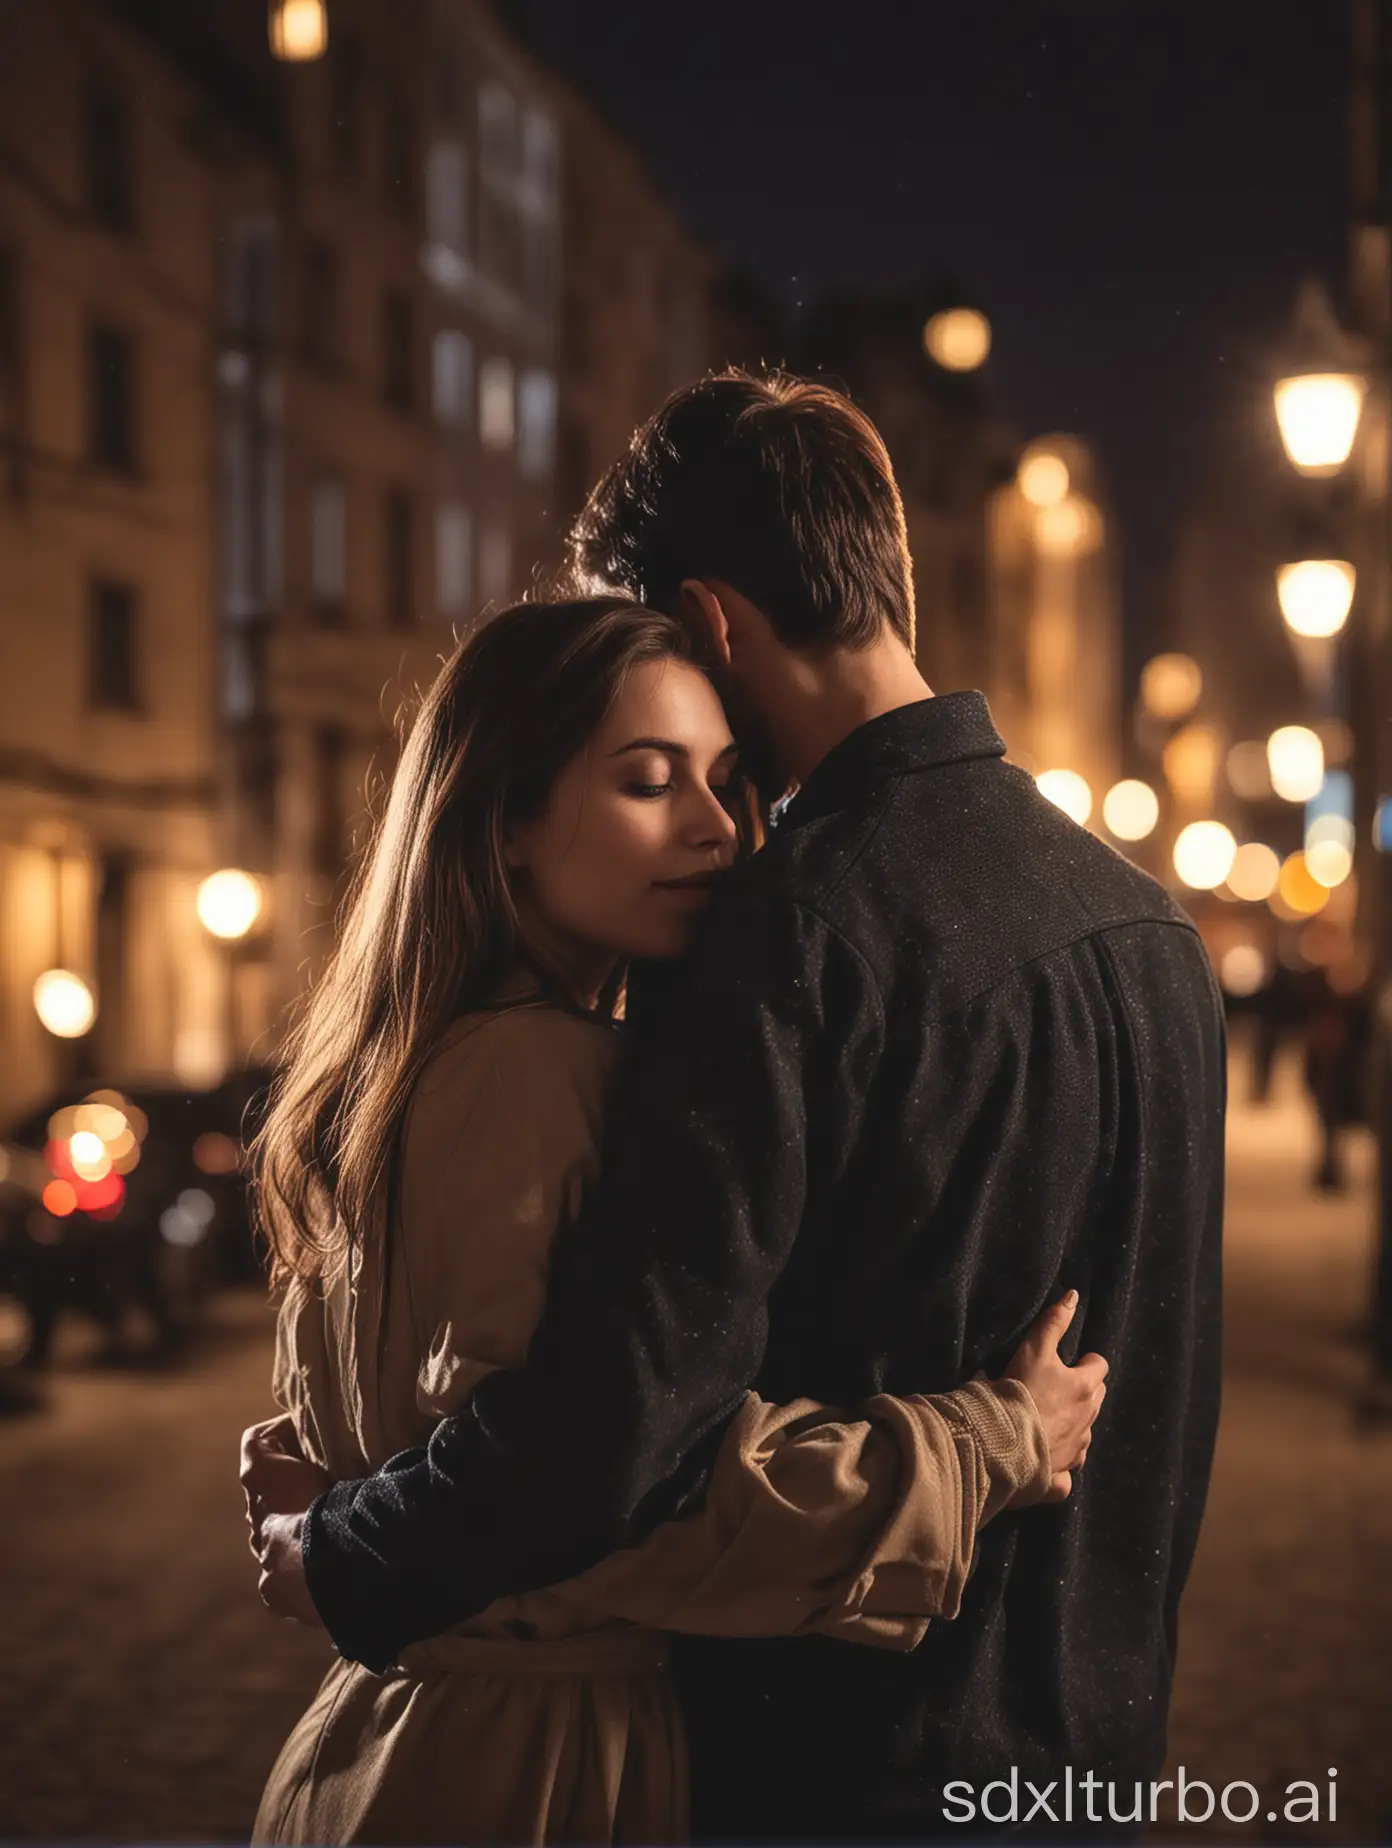 woman and a man hugging, romantic, background city light bokeh, back view, view from the back